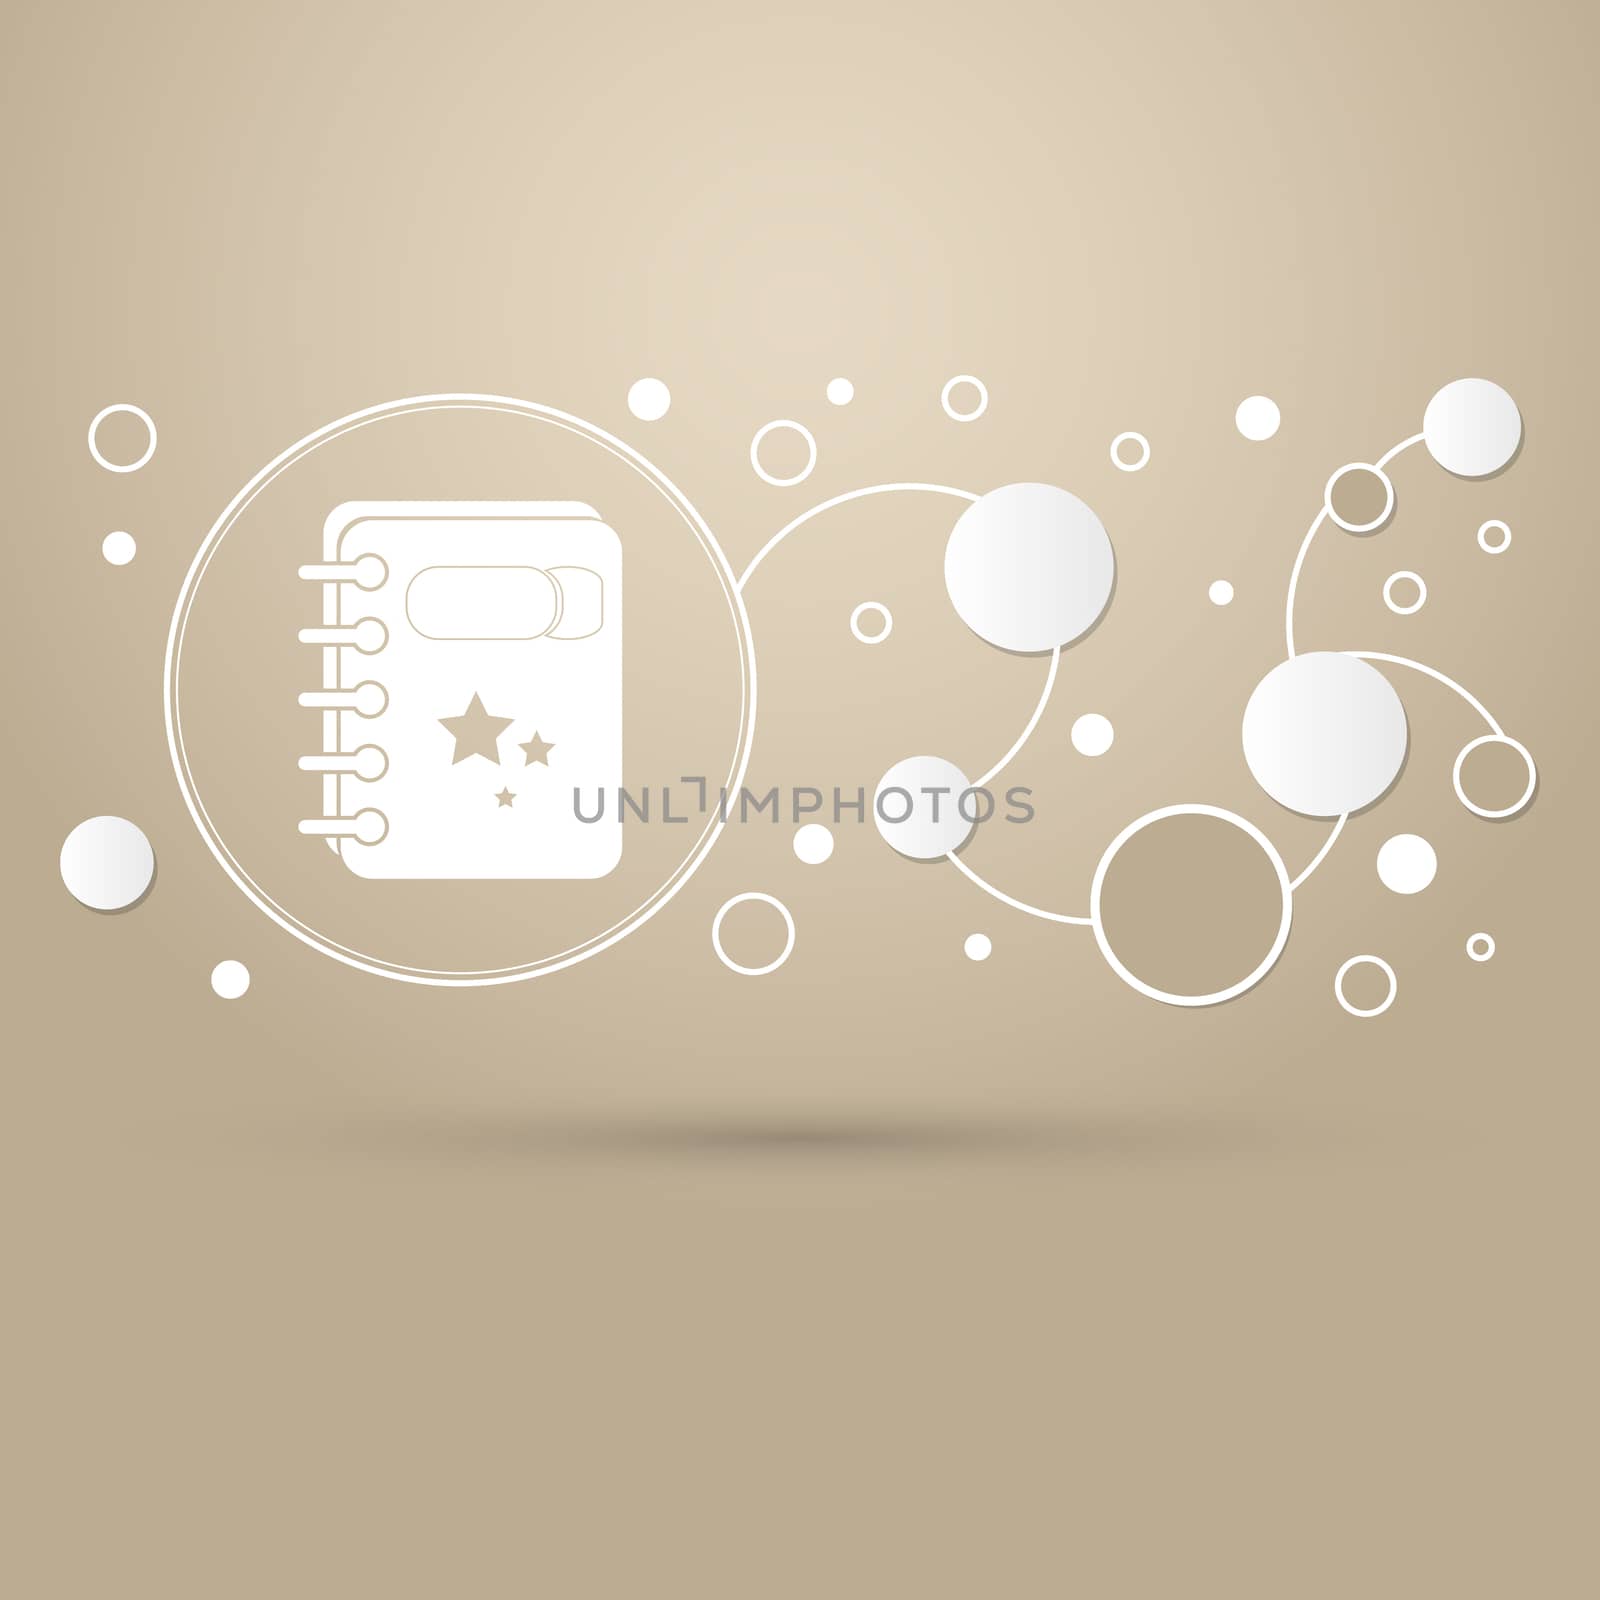 book Icon on a brown background with elegant style and modern design infographic. illustration